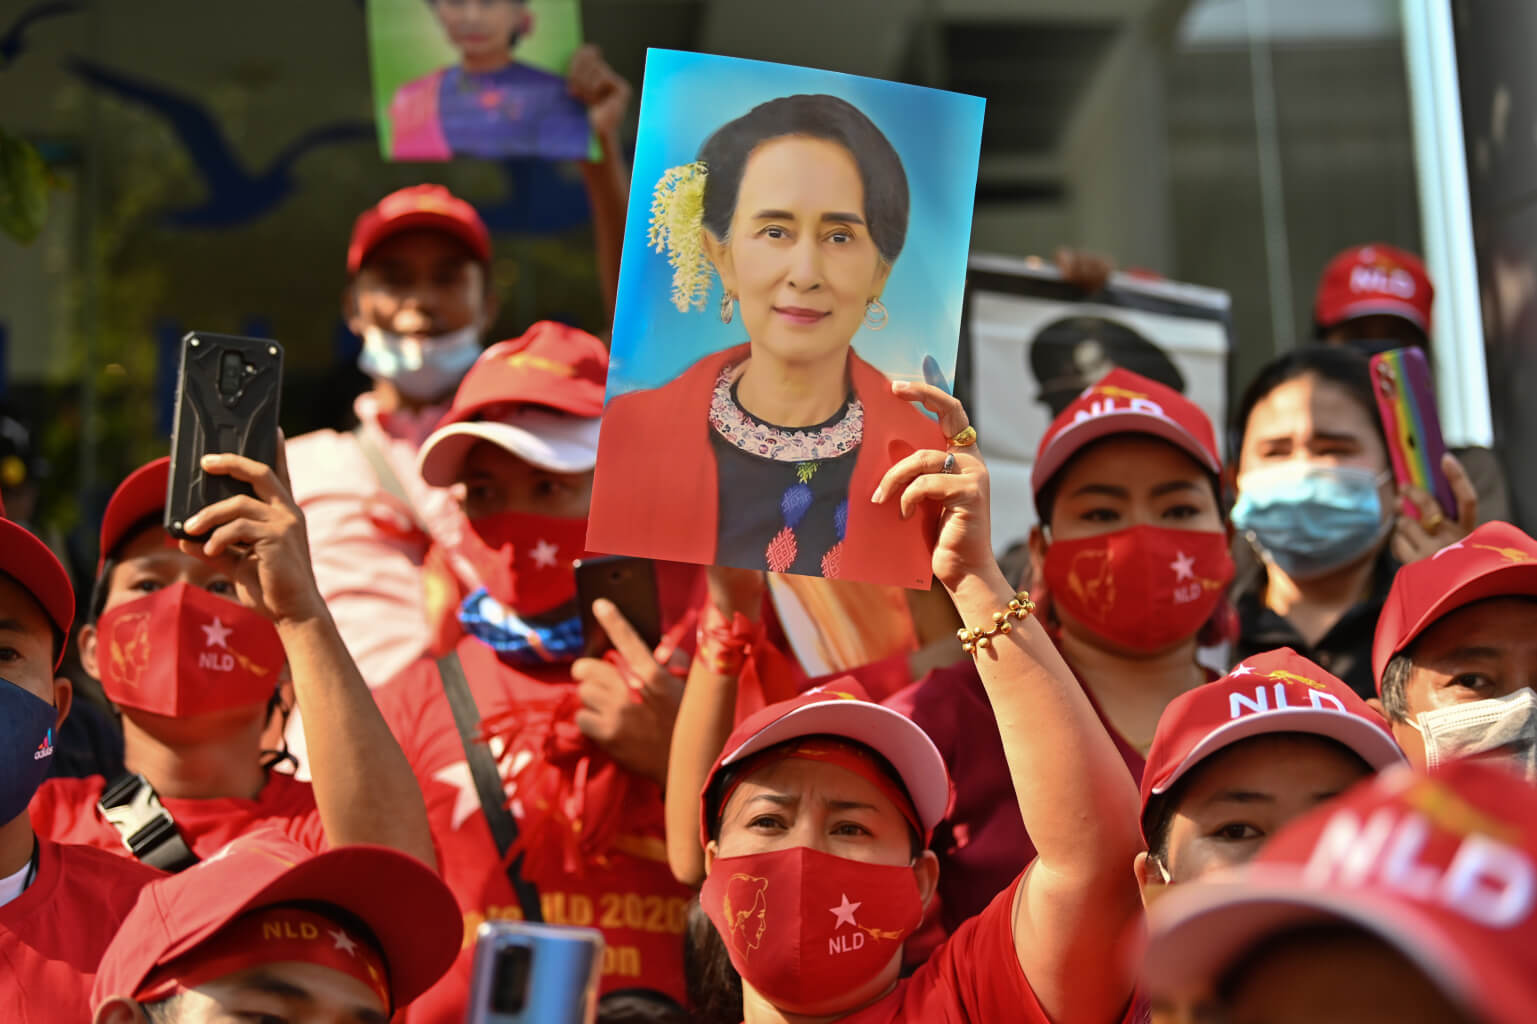 UN Security Council Fails to Condemn Myanmar Coup Due to Reluctance From Russia and China